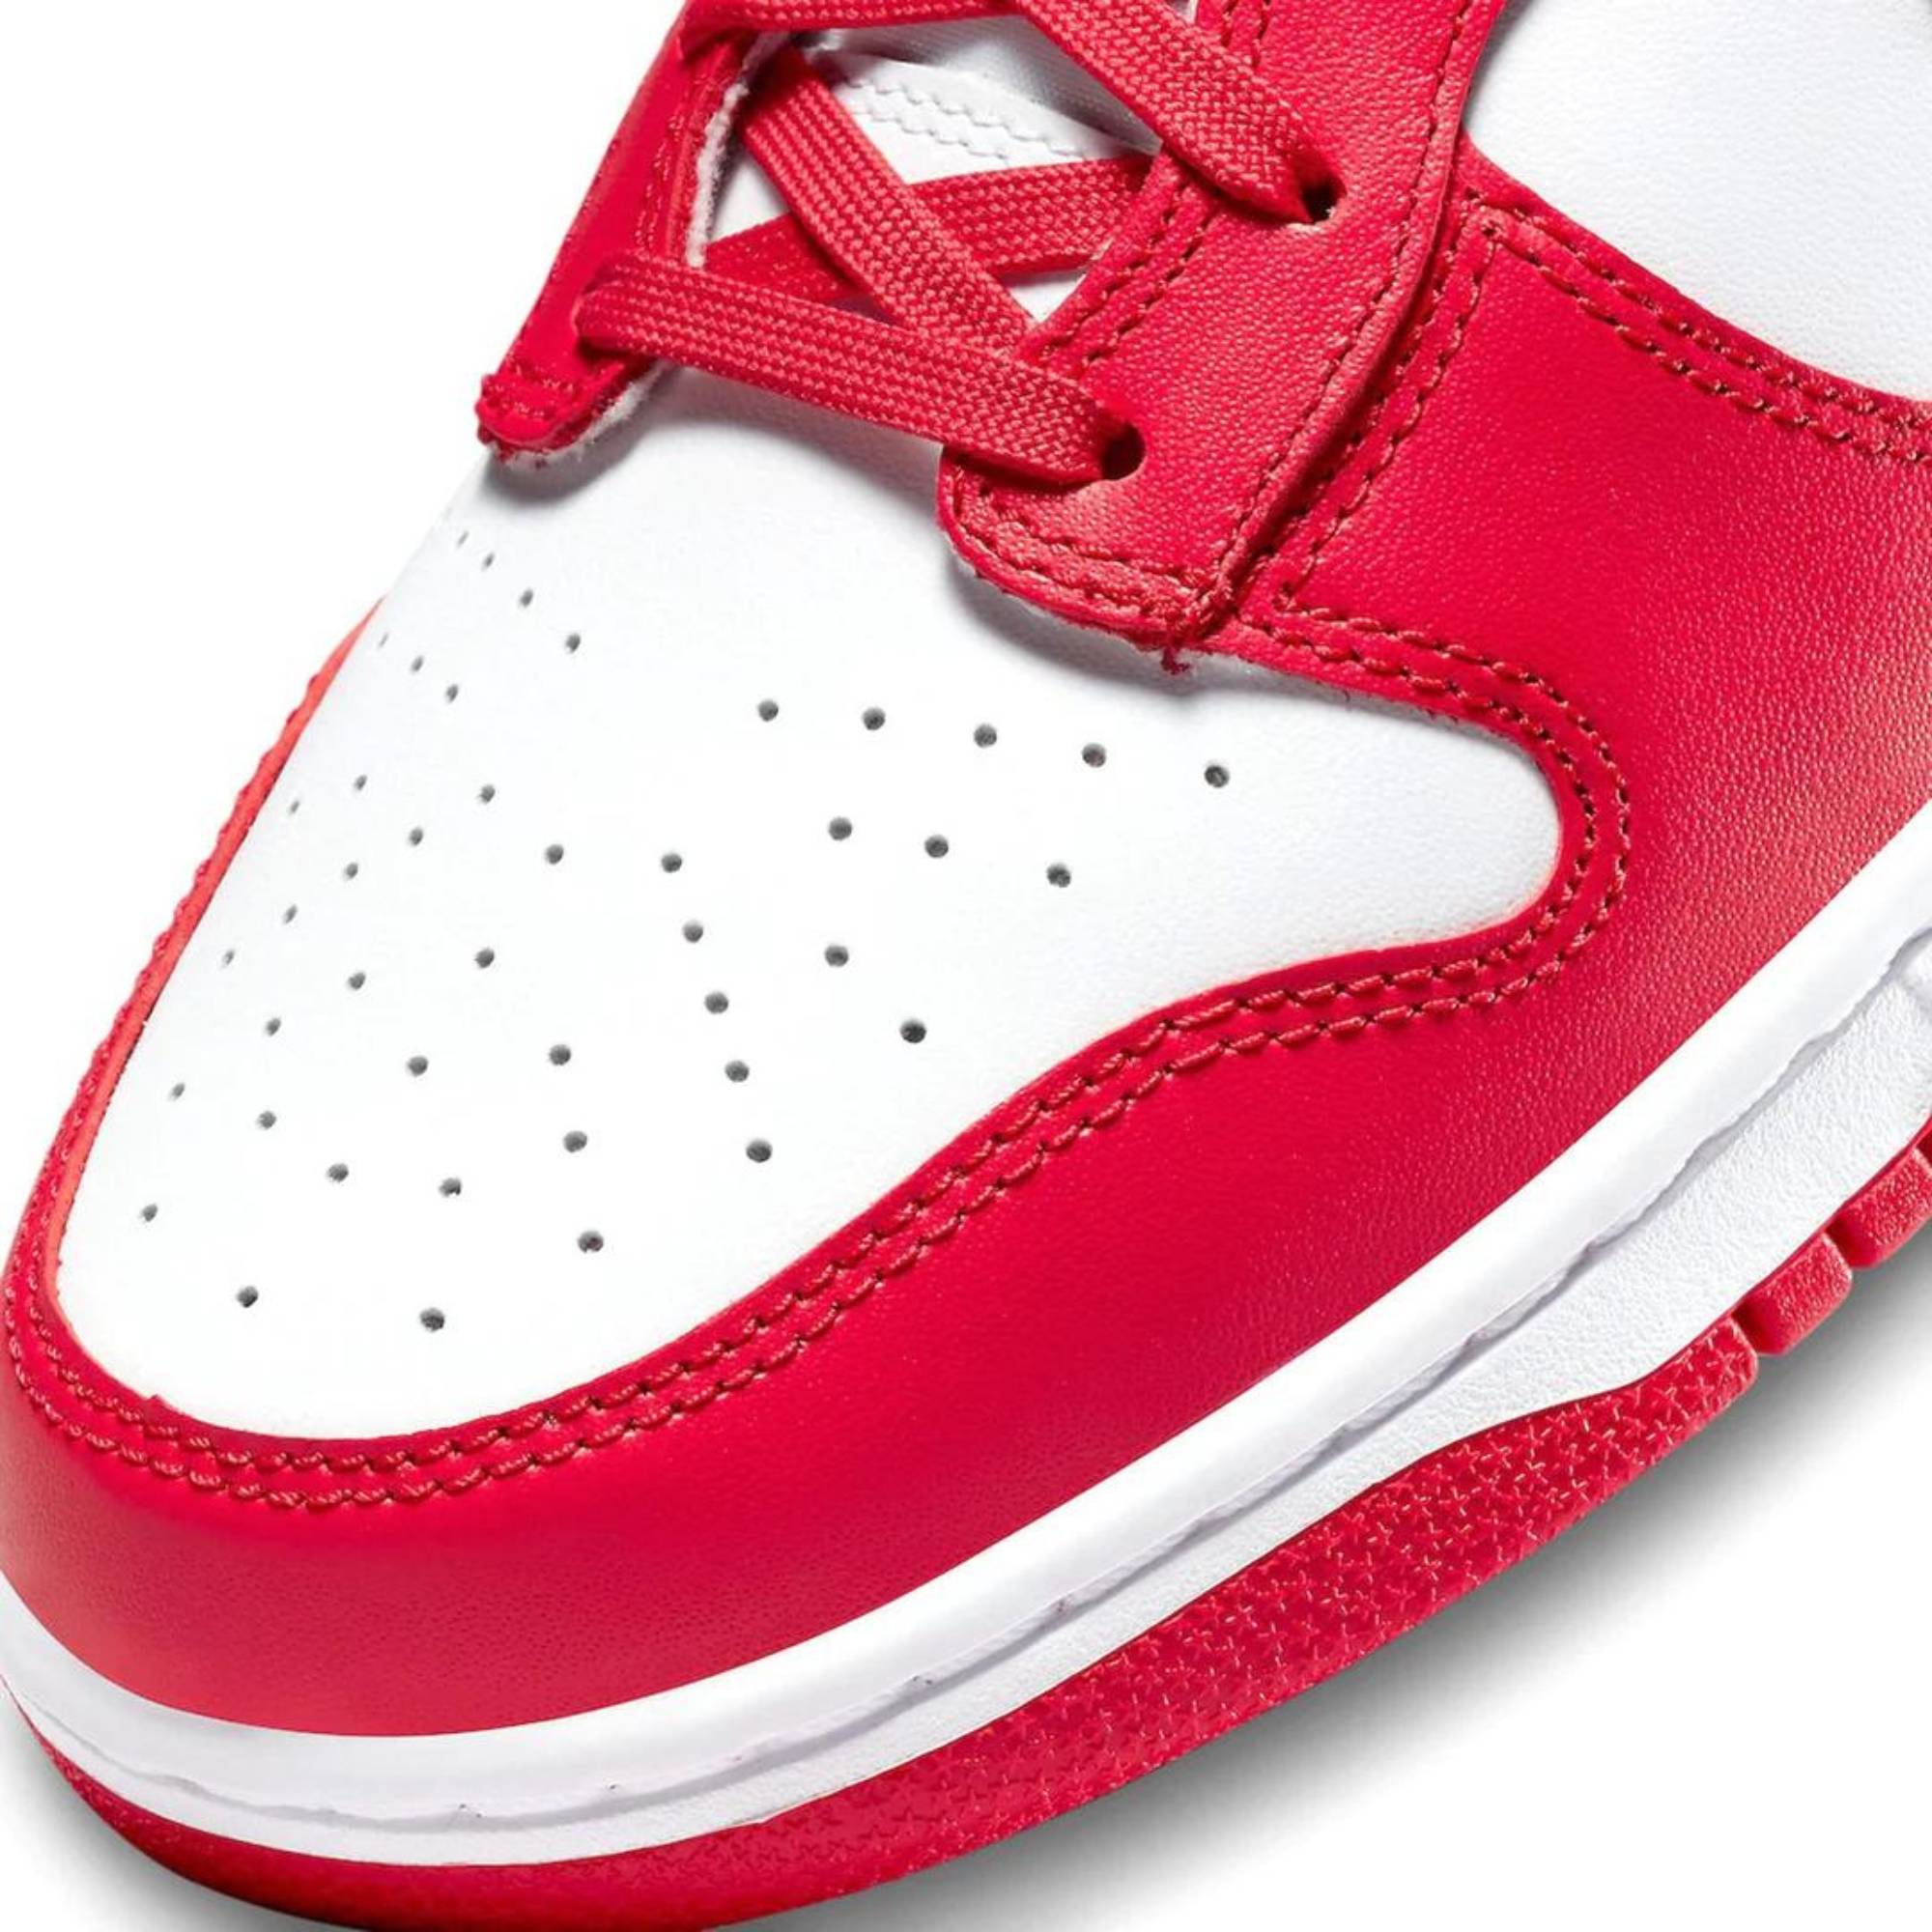 Nike Dunk High Youth ’Championship Red’ Sneakers